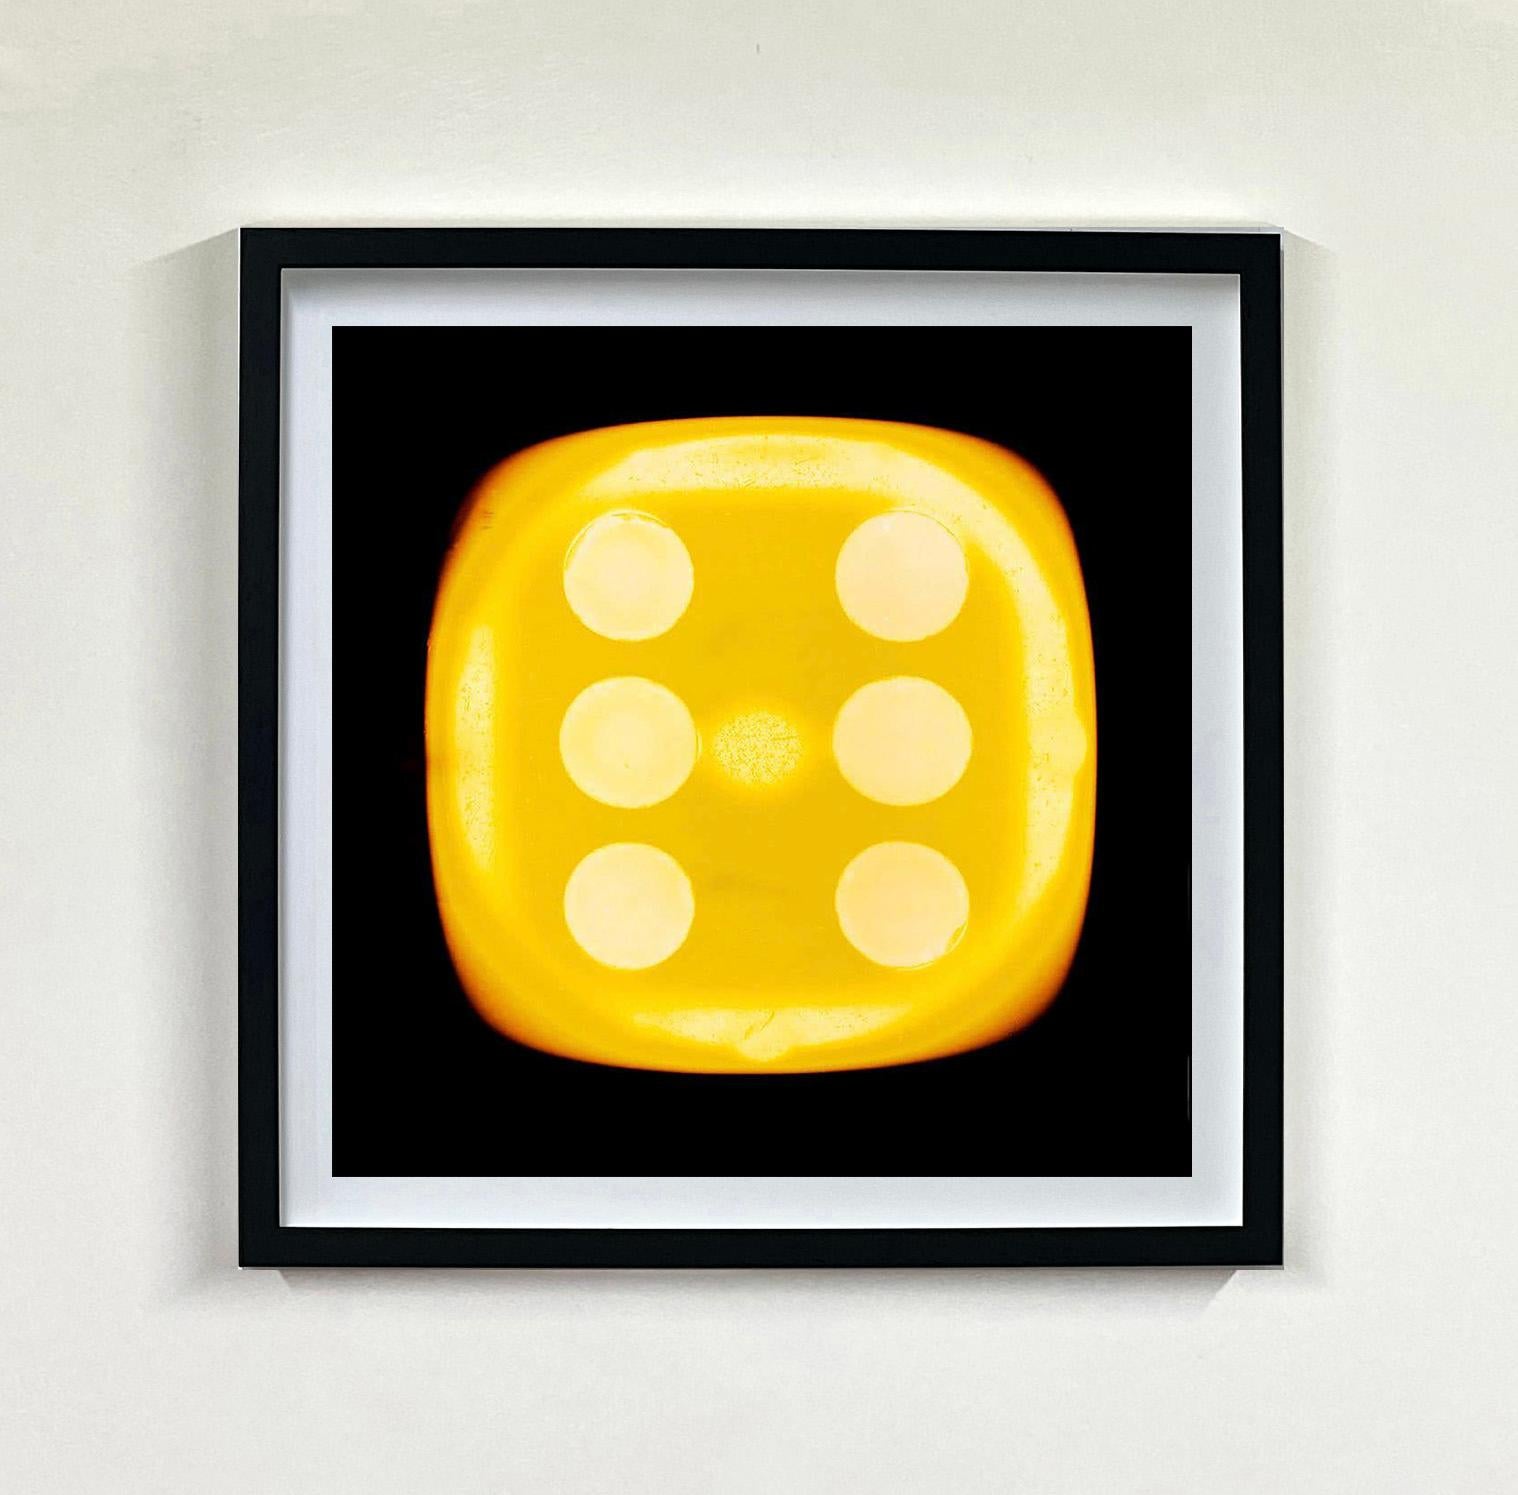 Dice Series, Chartreuse Yellow Six (black) - Pop Art Color Photography - Green Print by Heidler & Heeps